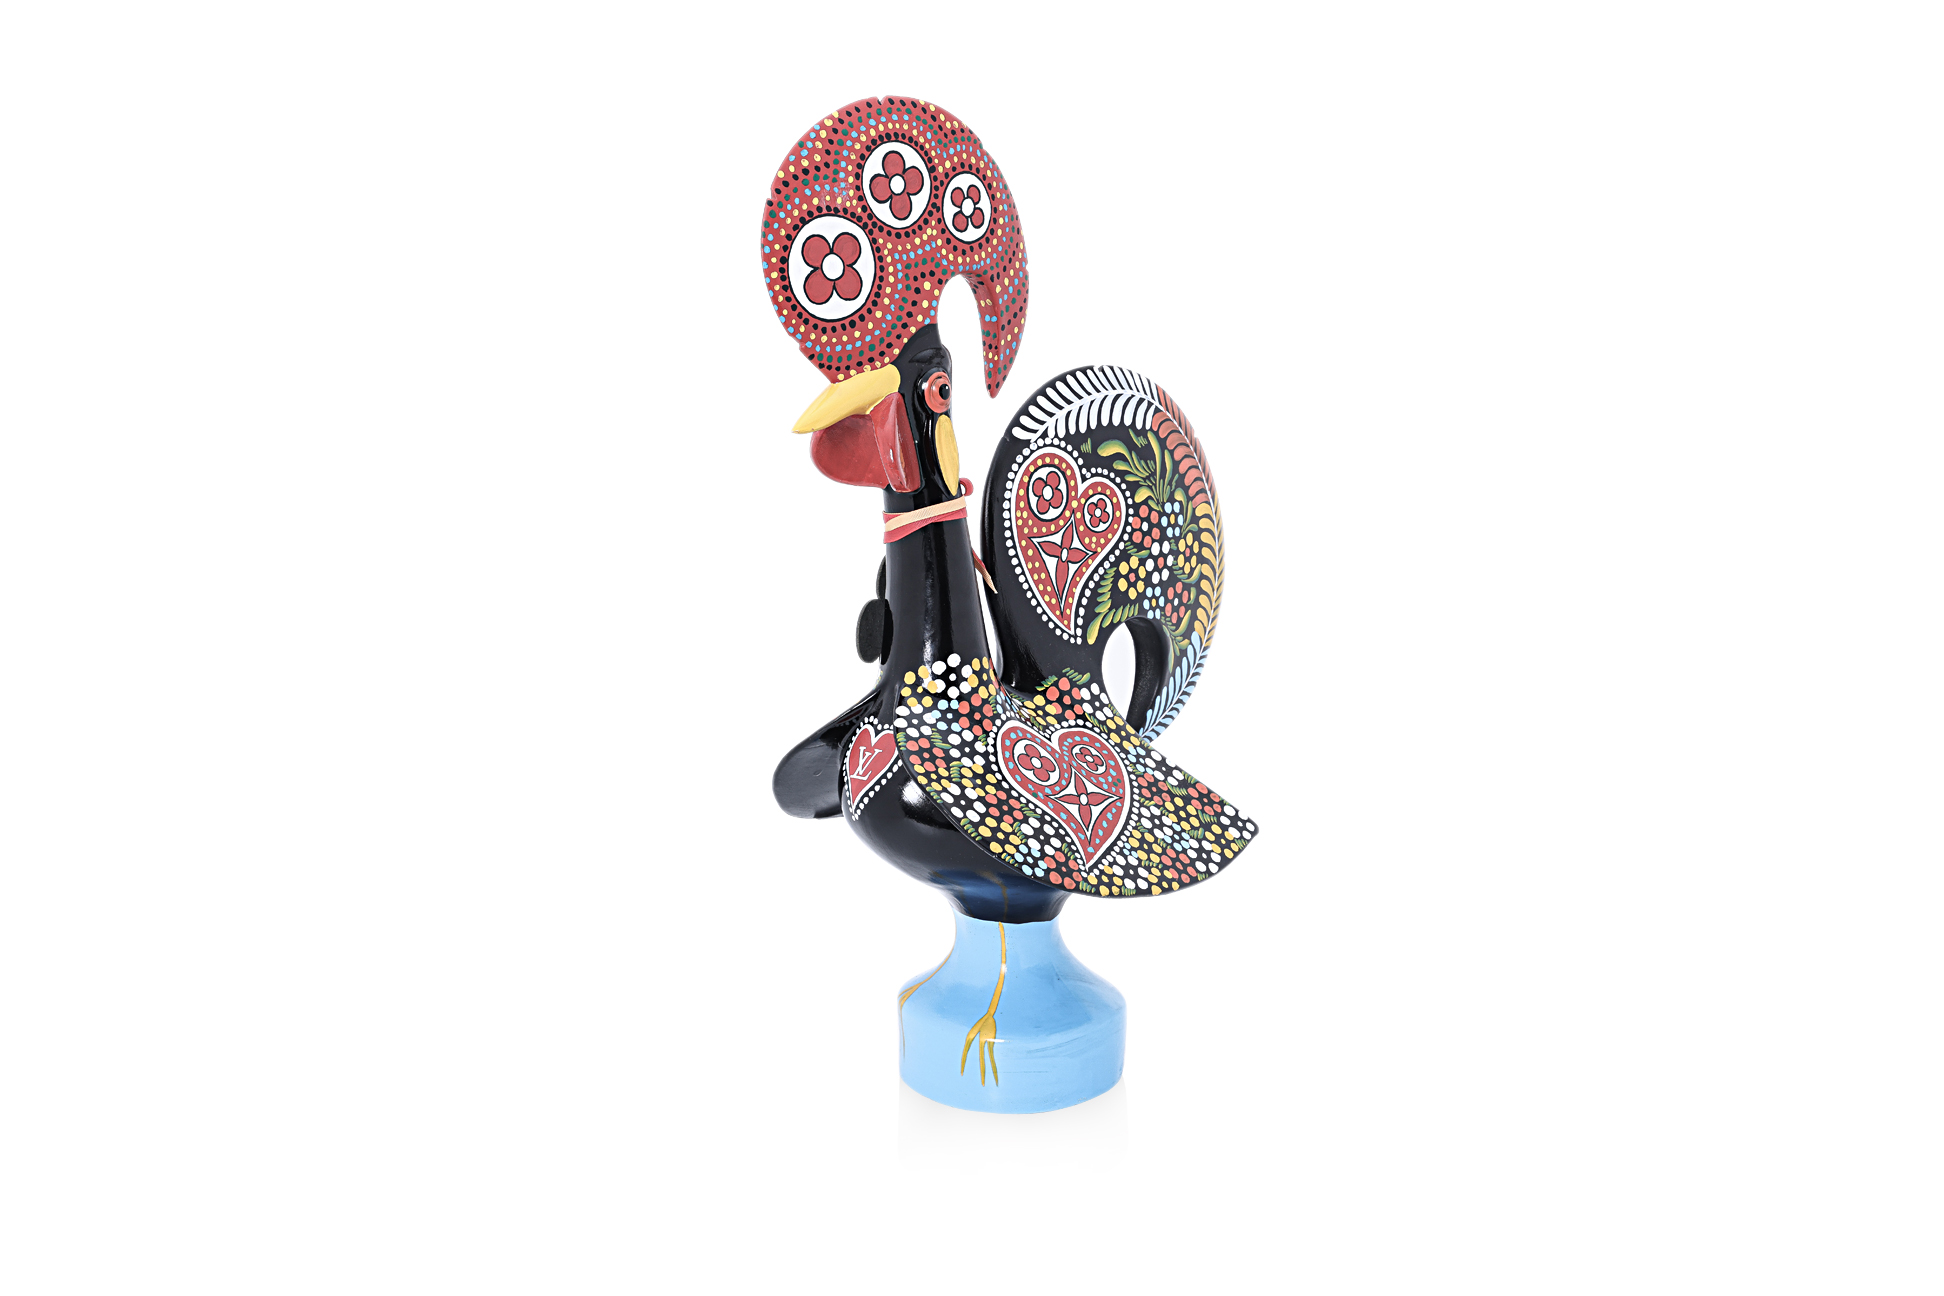 A CERAMIC ROOSTER OF BARCELOS SCULPTURE - Image 2 of 3